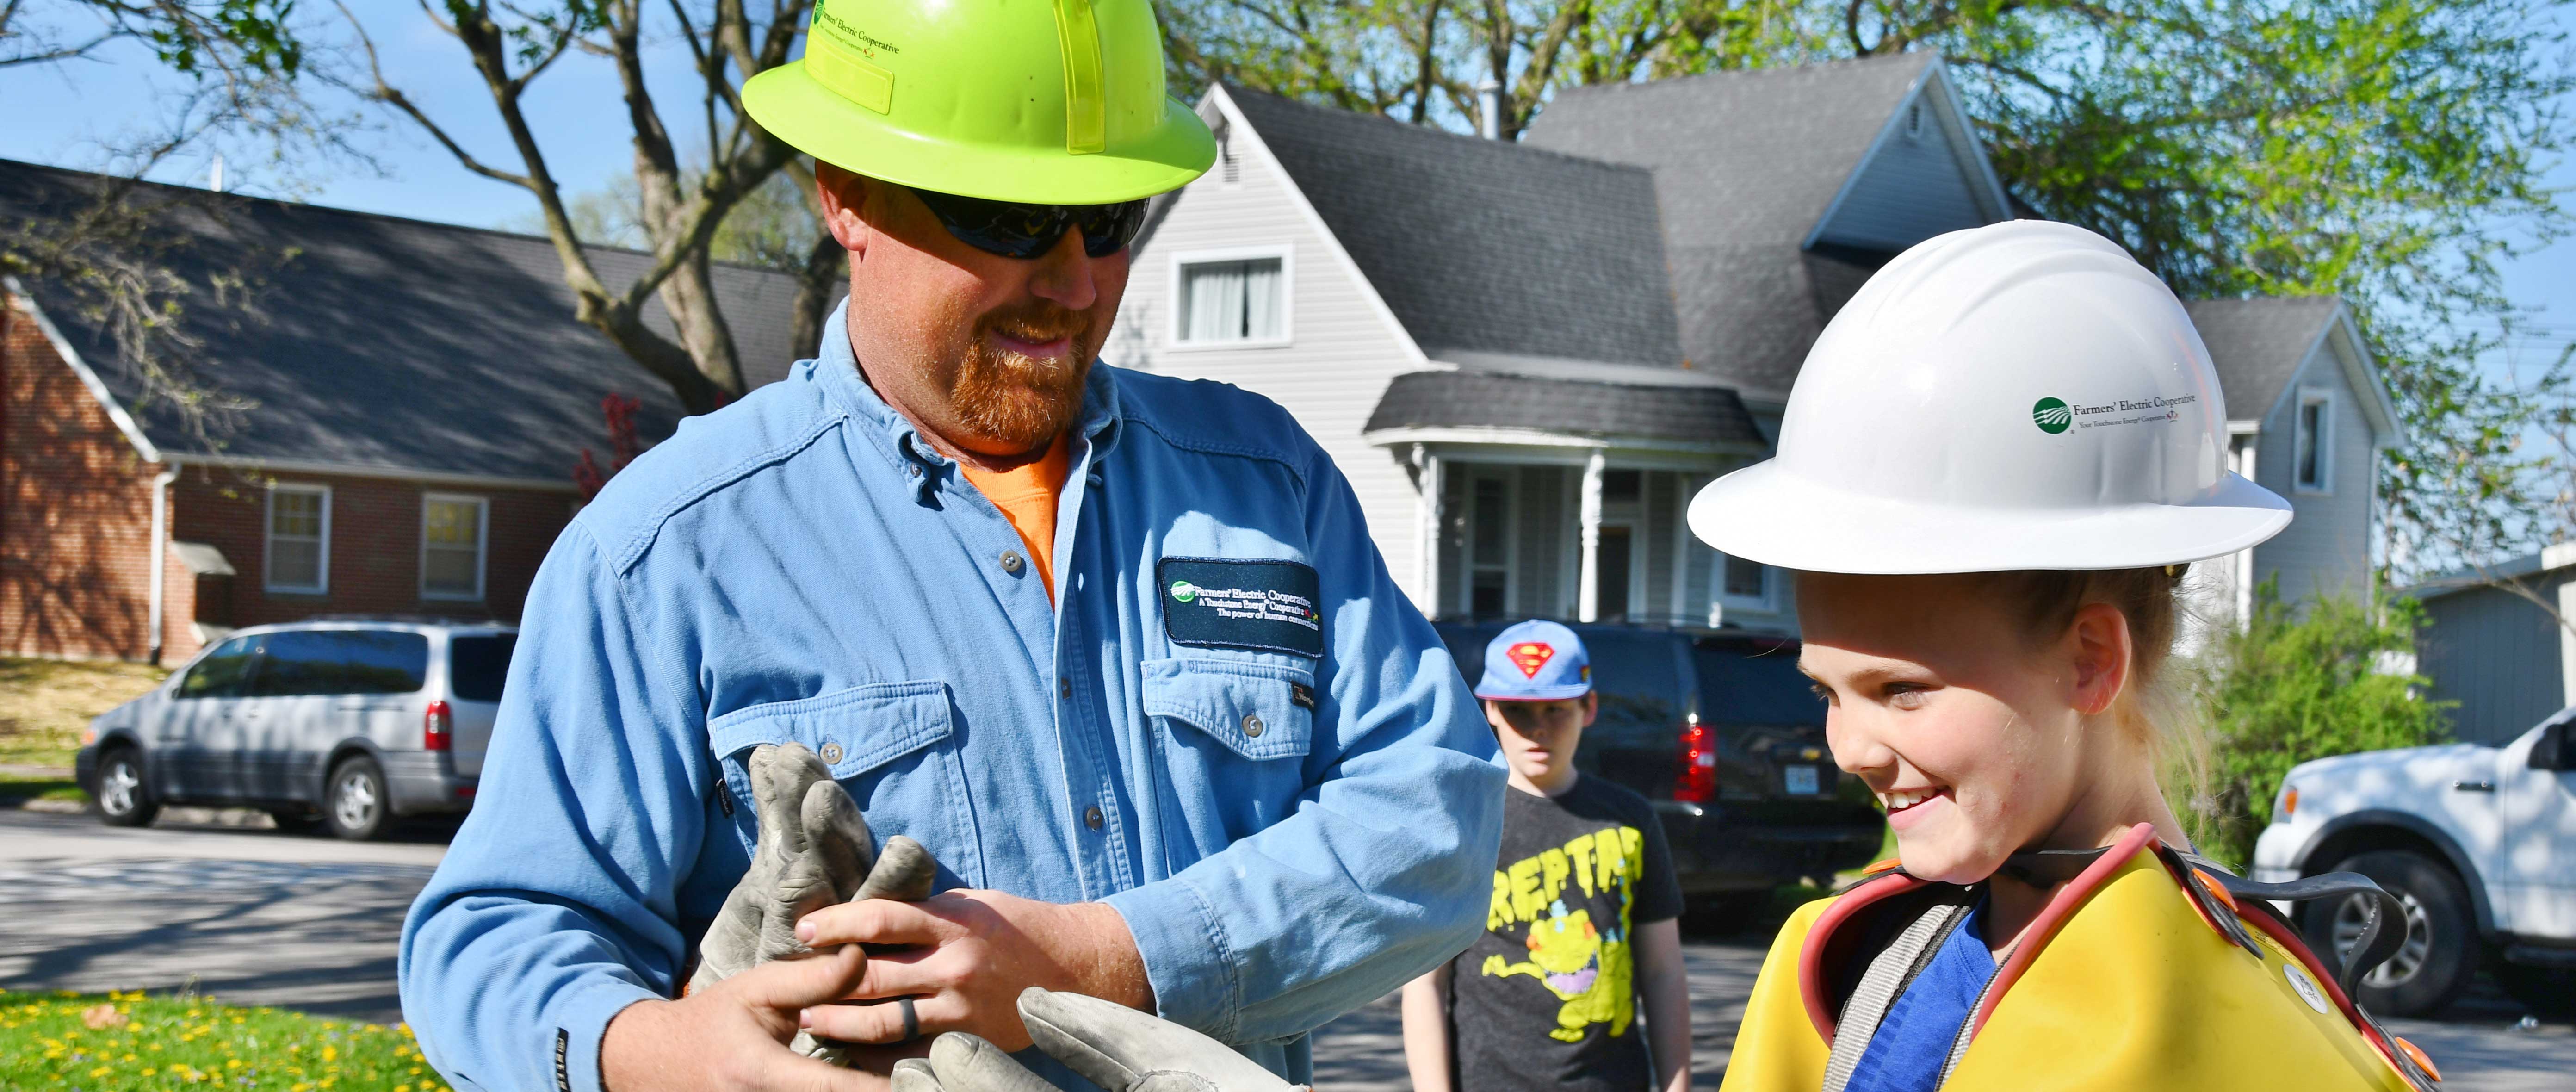 Lineman showing a student his safety gear